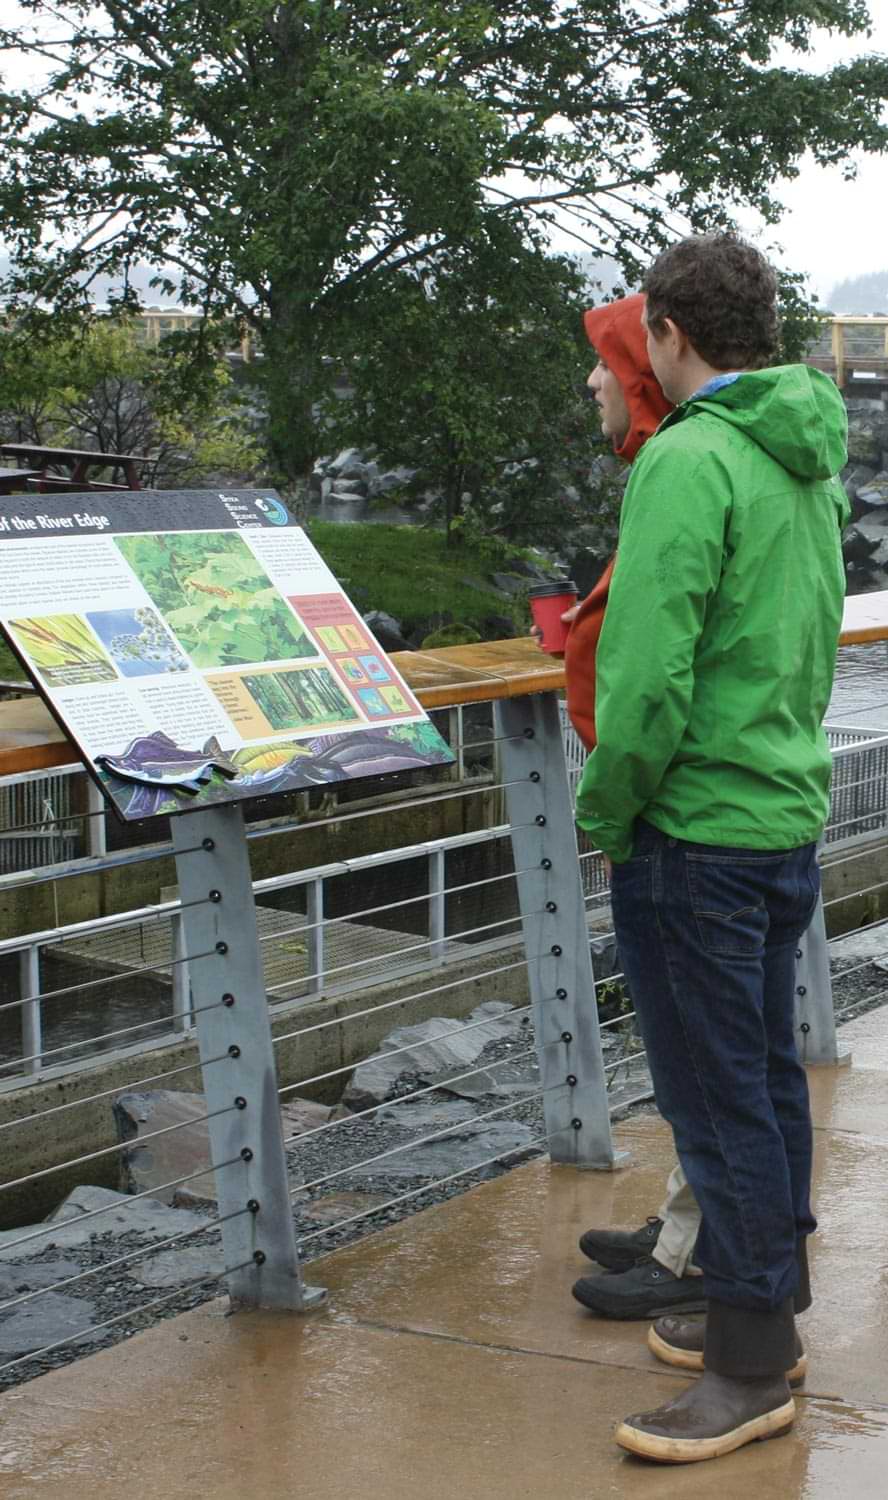 a man and woman stand outside looking at a habitat information sign